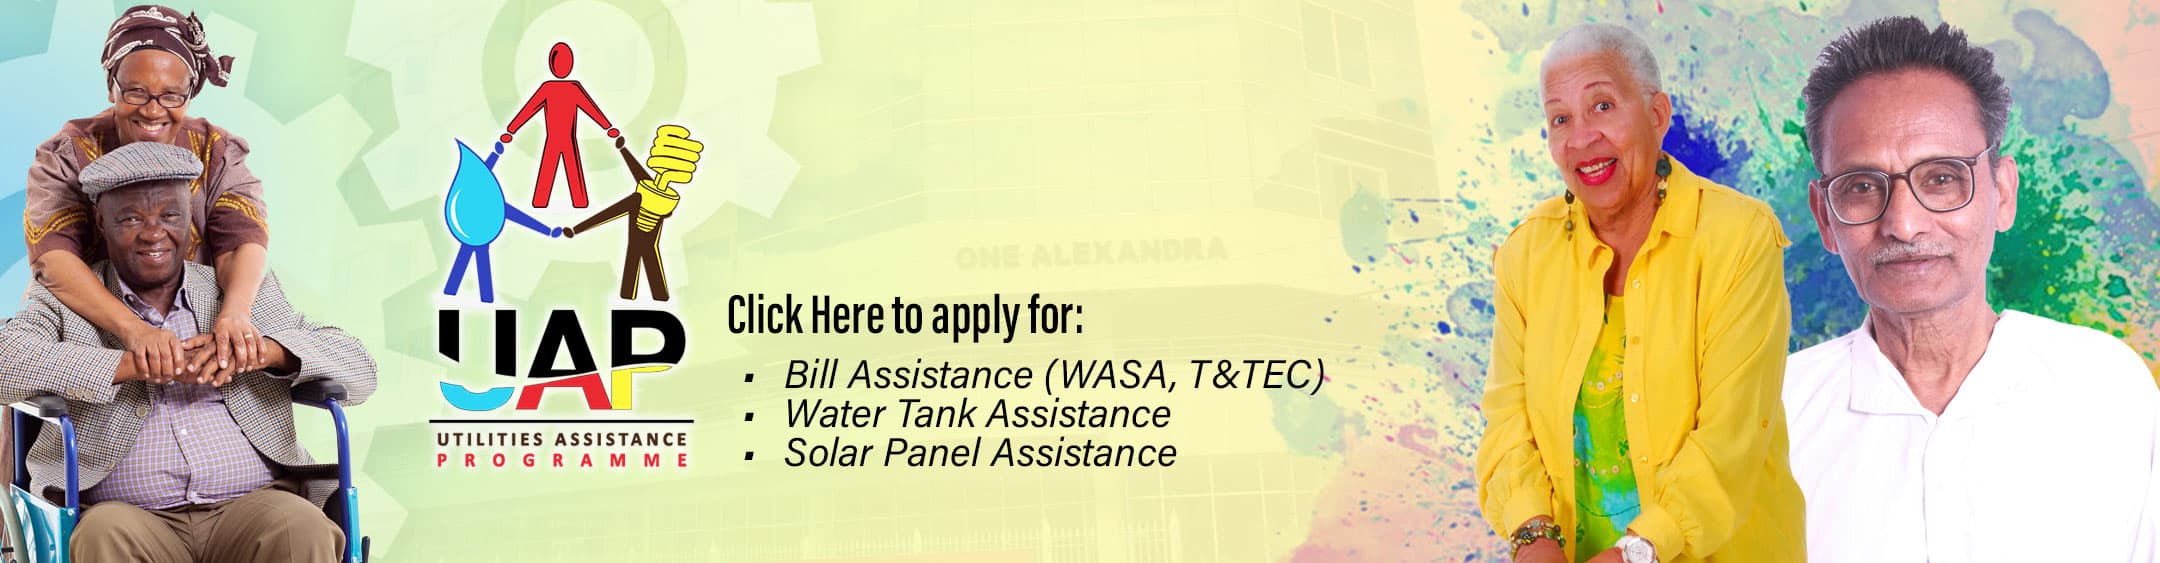 One of the social welfare programmes offered by the Ministry of Public Utilities is the Utilities Assistance Programme (UAP) which provides discounts to the disadvantaged in society to ensure they can access the basic utilities of water and electricity